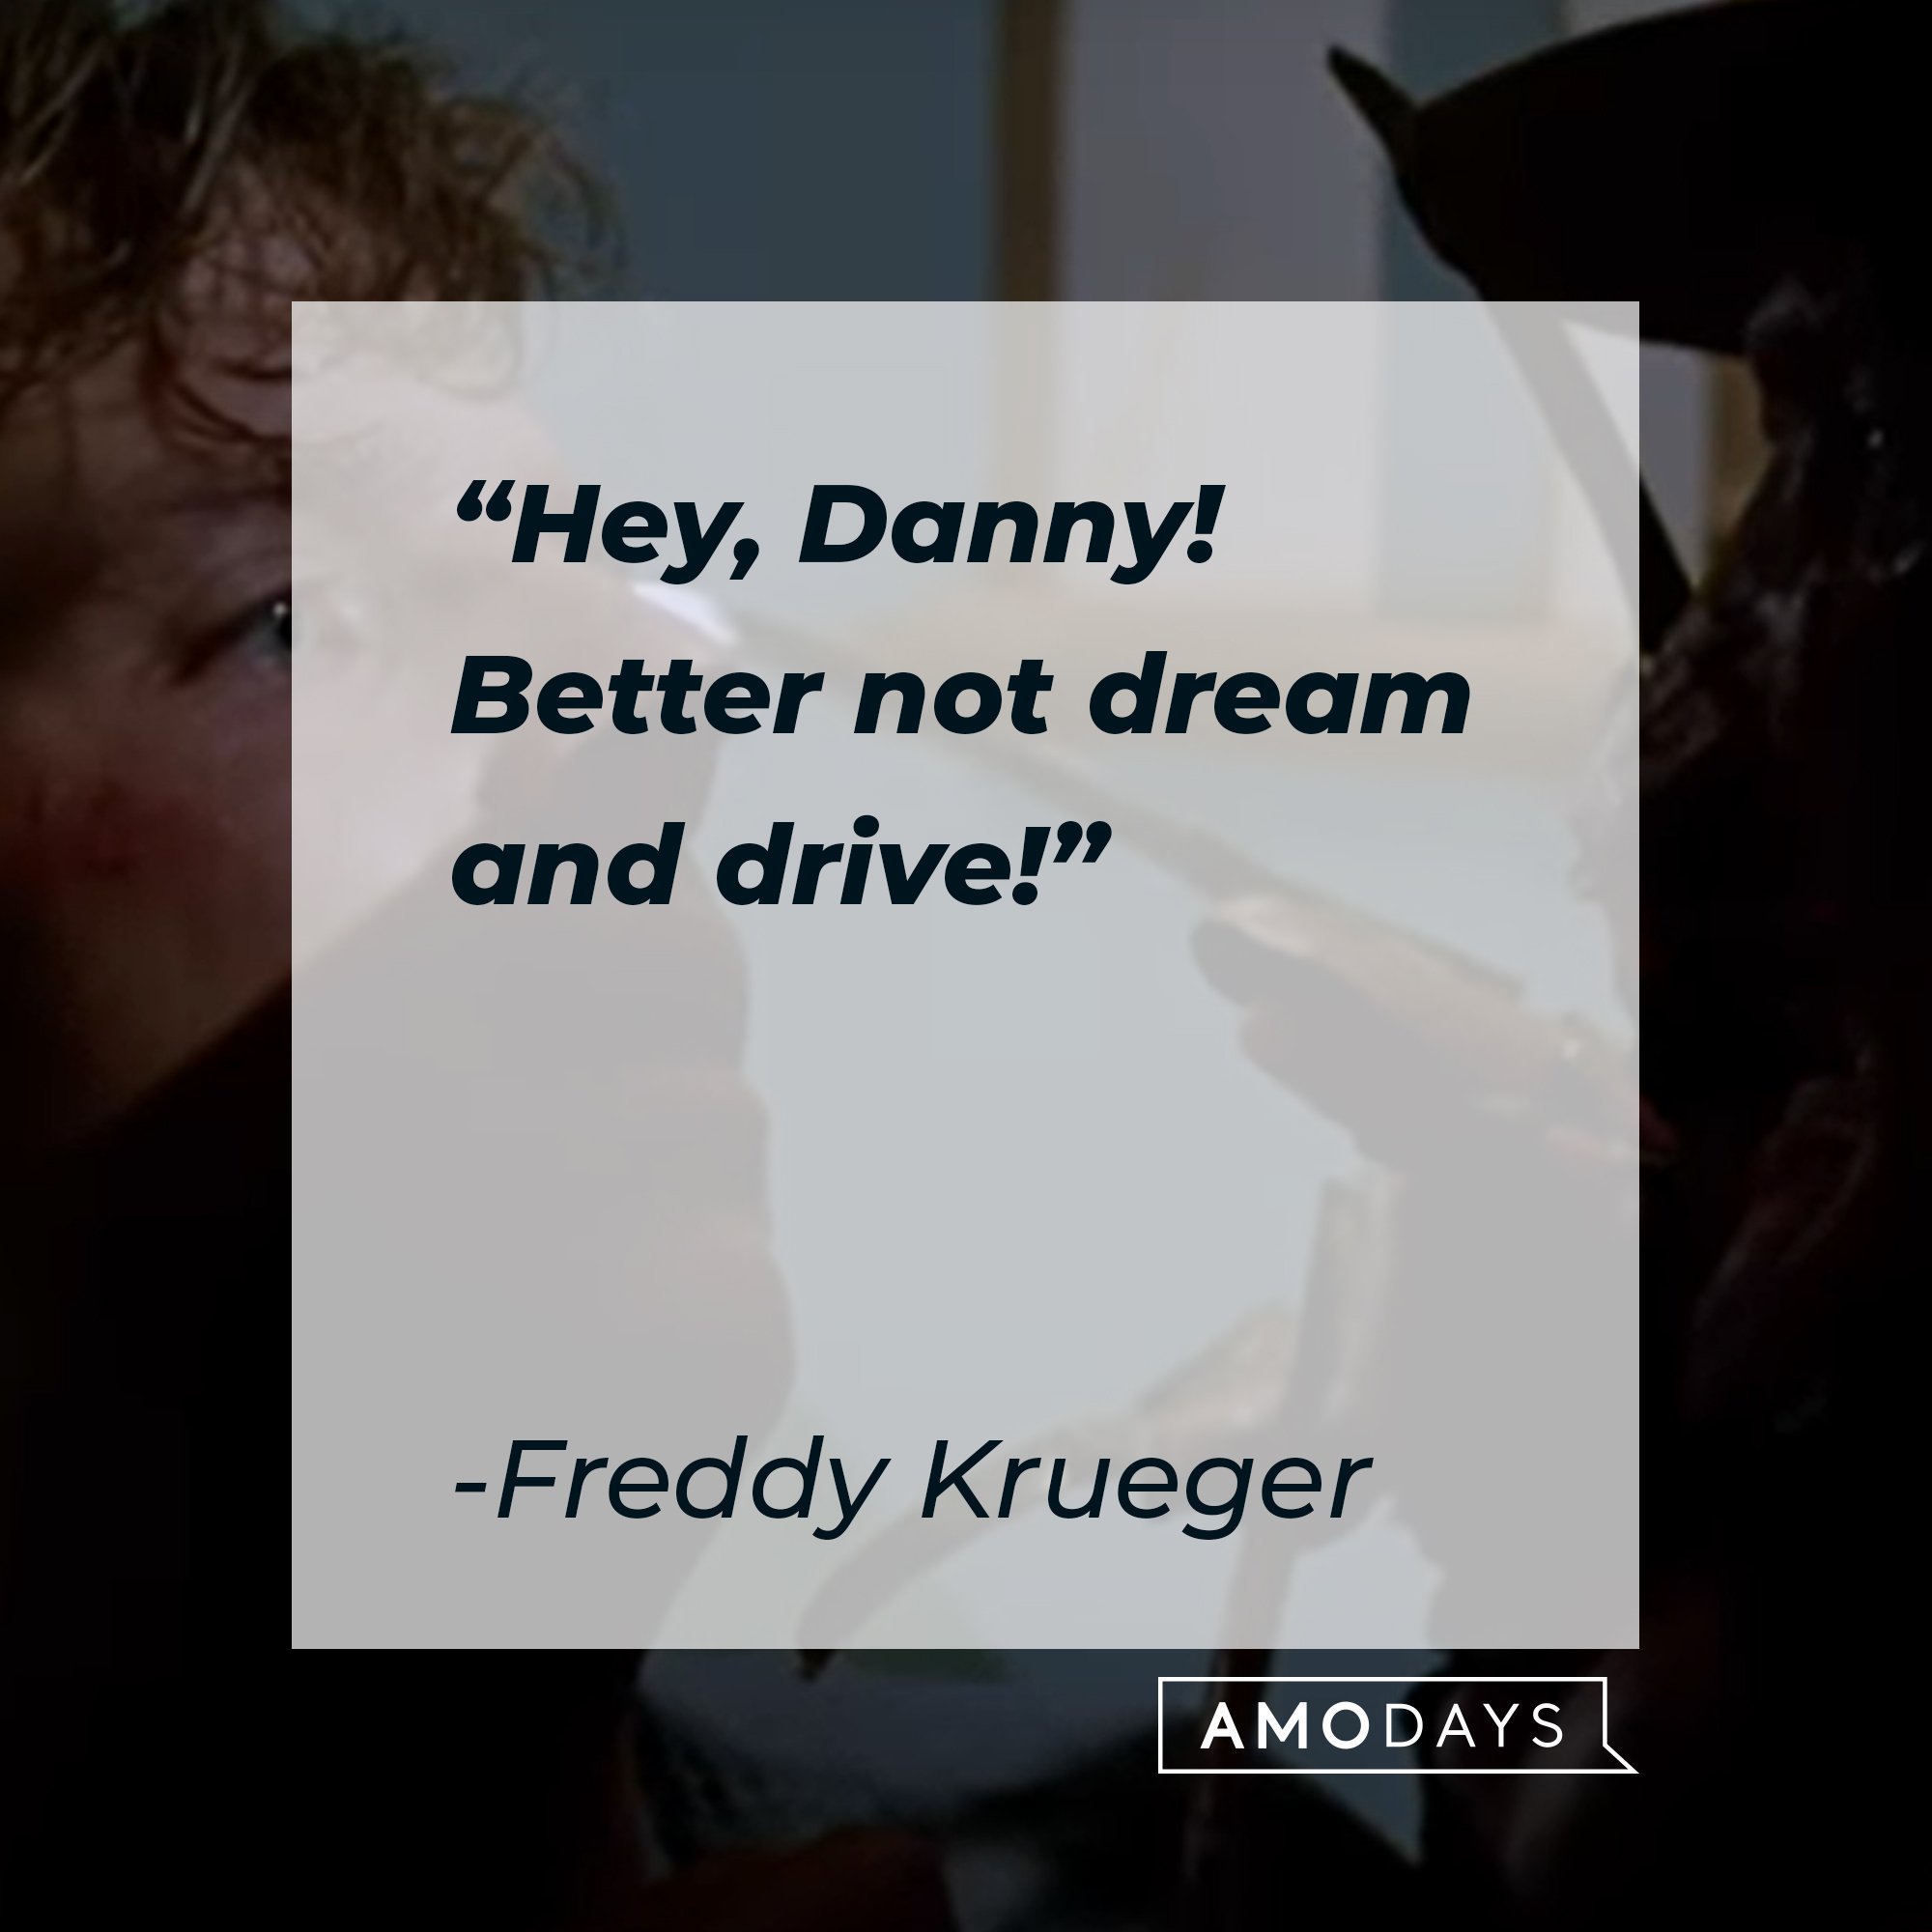 Freddy Krueger’s quote: "Hey, Danny! Better not dream and drive!" | Image: AmoDays